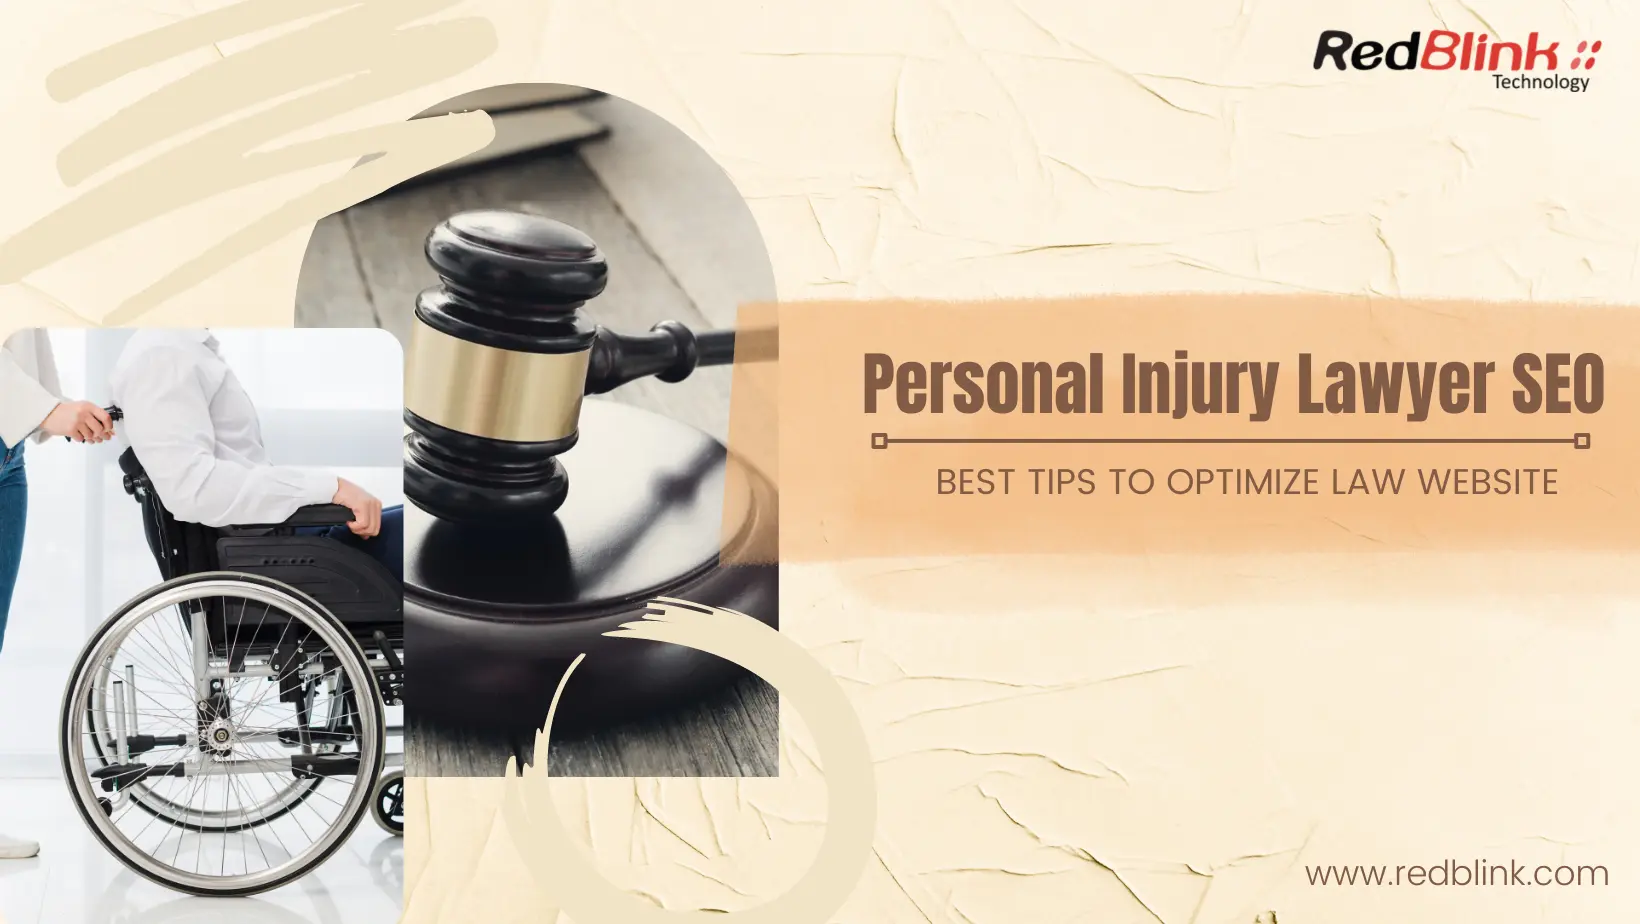 SEO for personal injury law firm